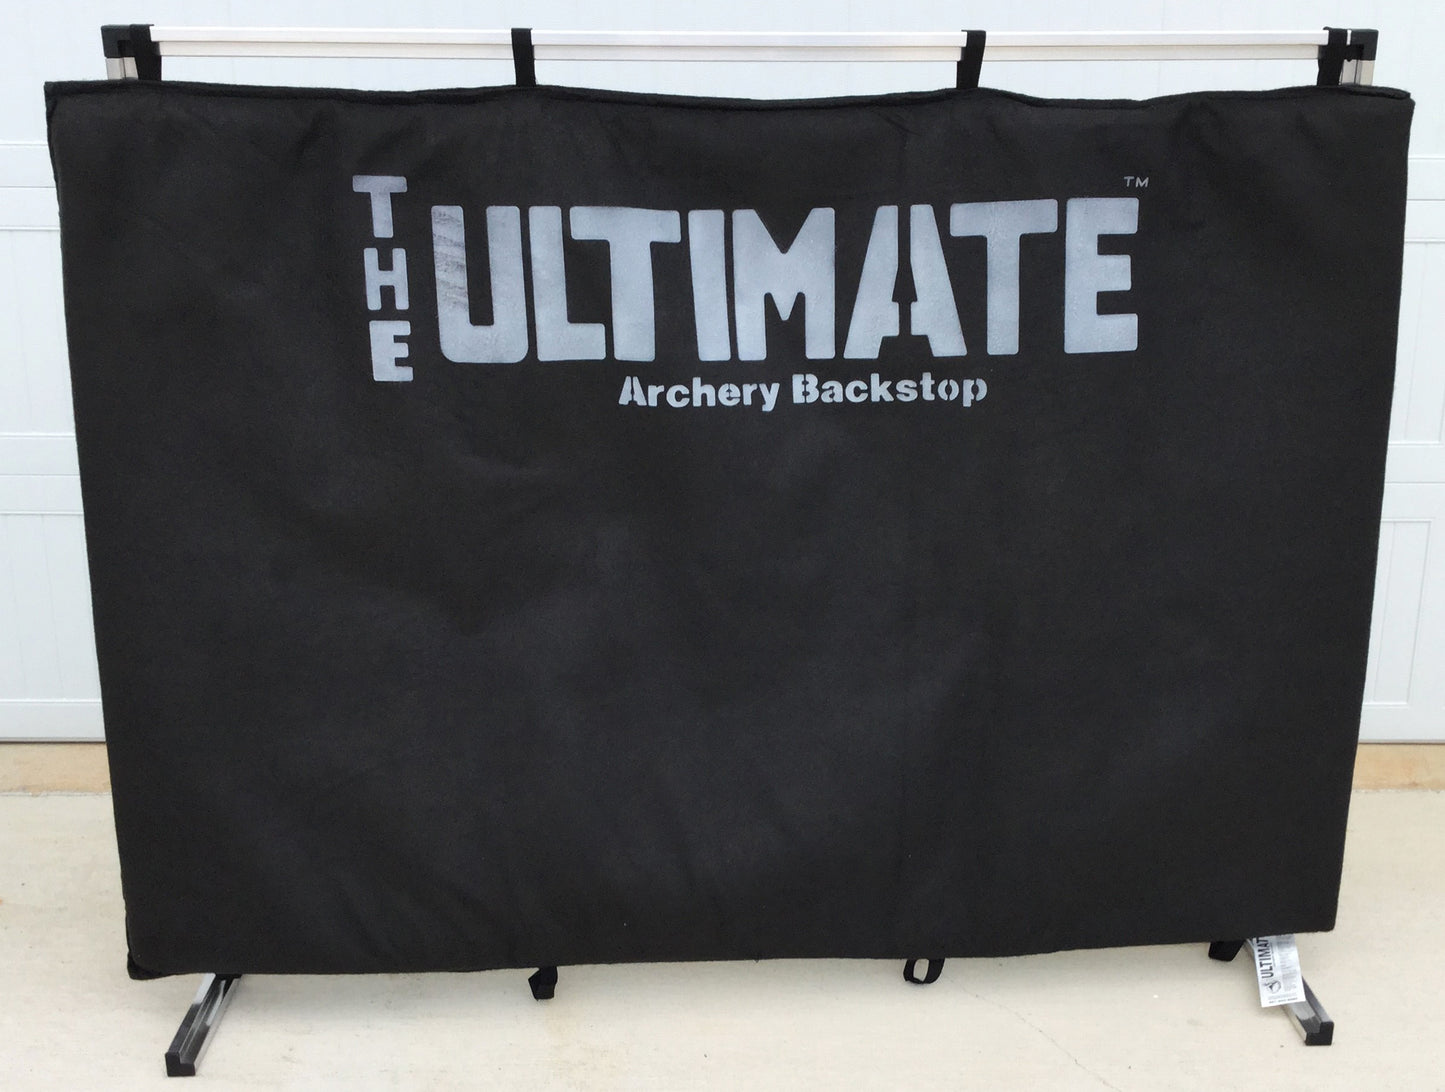 Aluminum Stand for the 5' x 6' Ultimate Archery Target Backstop